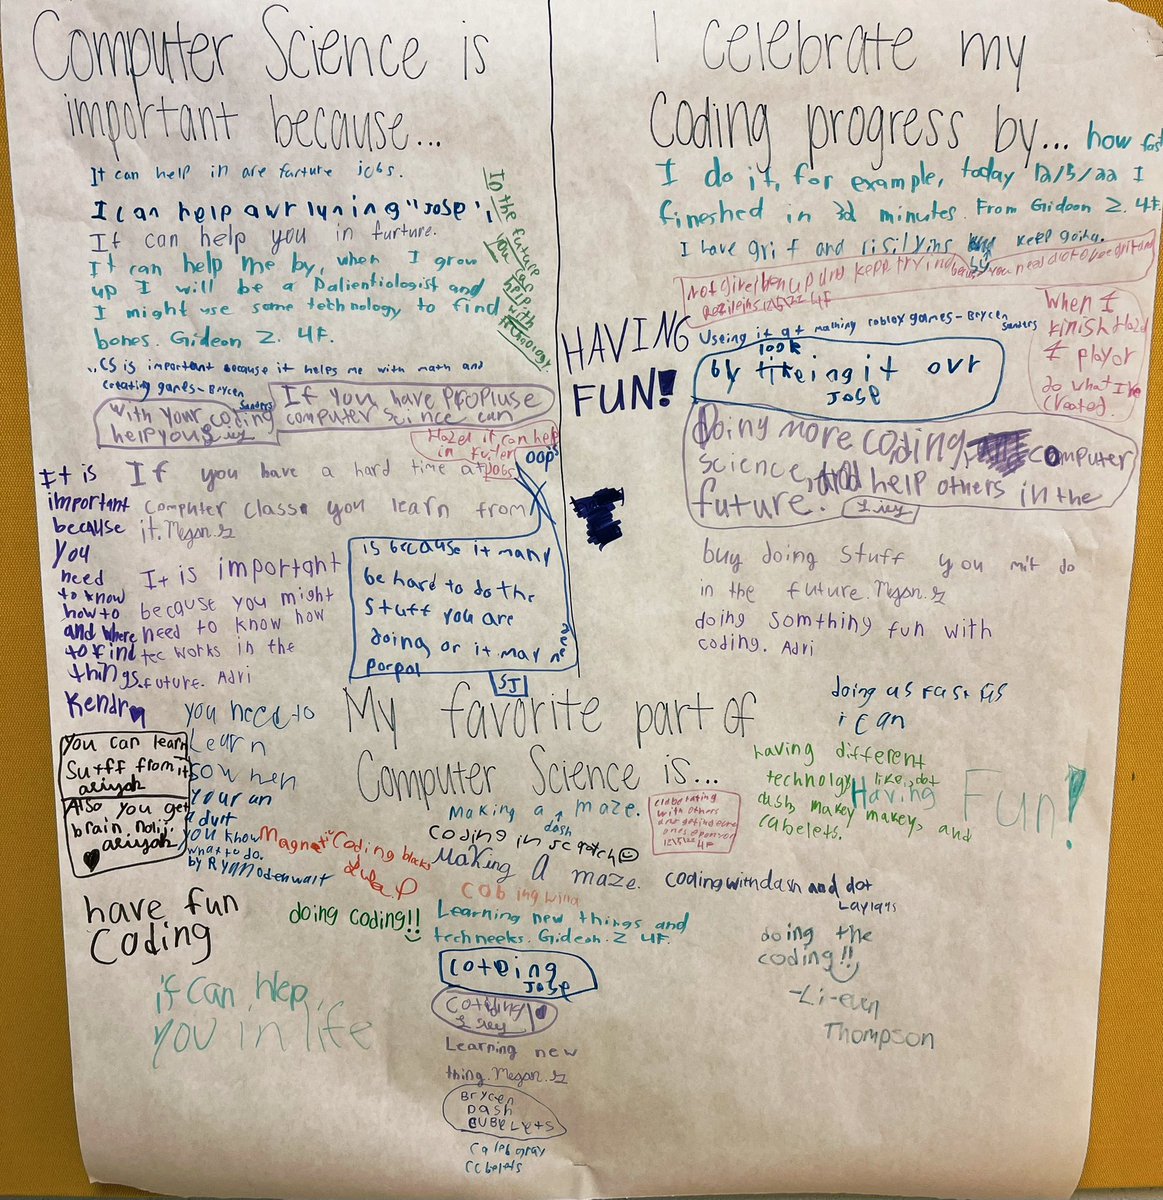 Throughout the week, students have been reflecting on their experiences in Computer Science. Check out what they shared! #CSEdWeek #CelebratingProgress